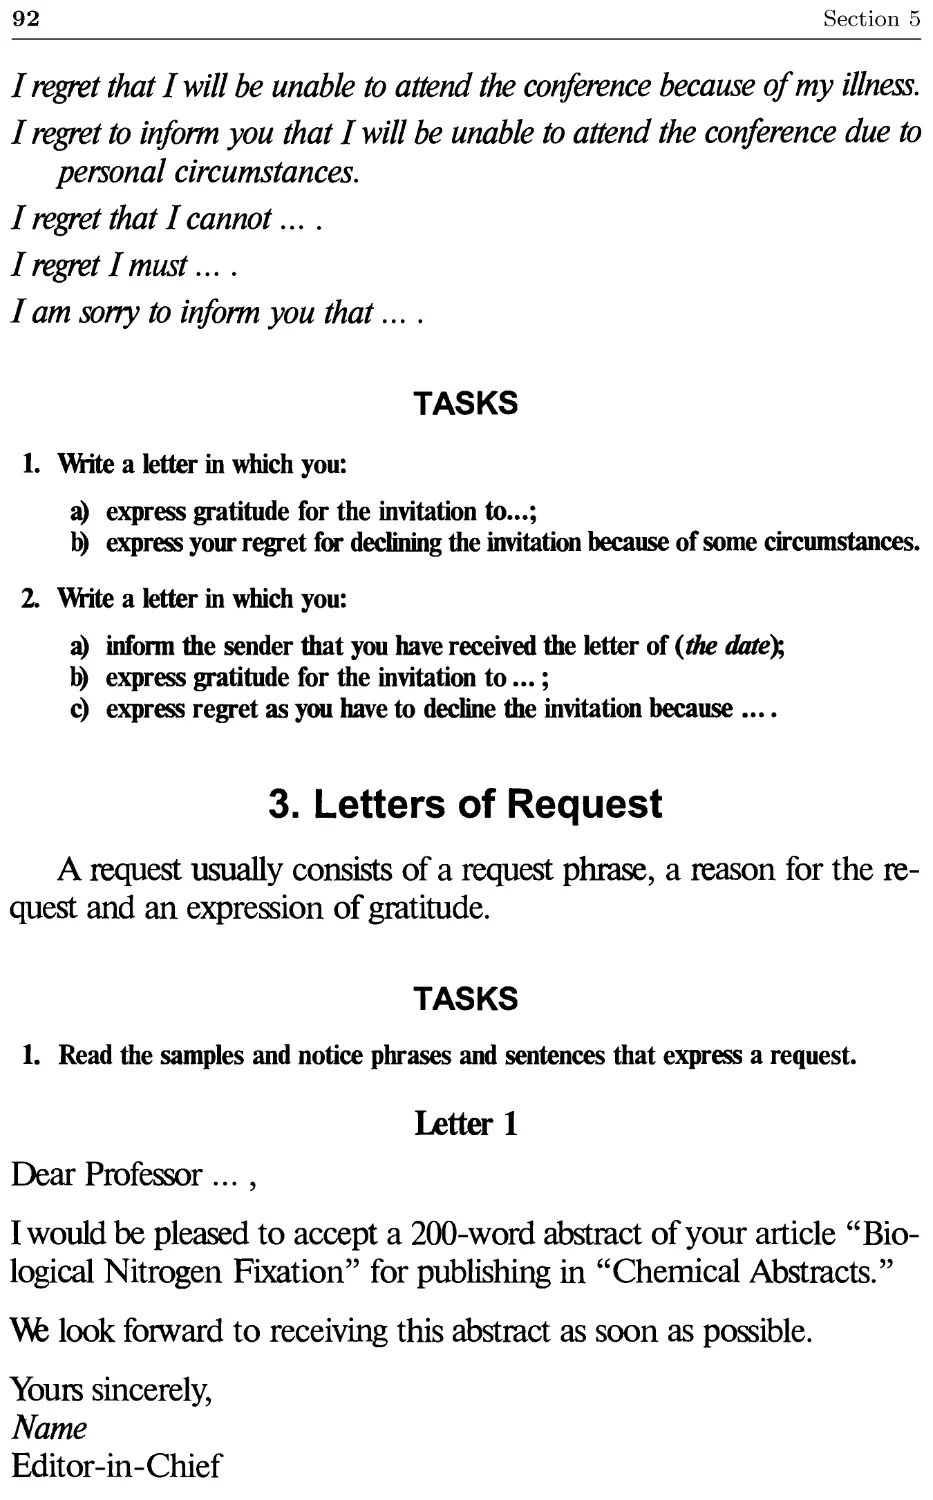 3. Letters of Request